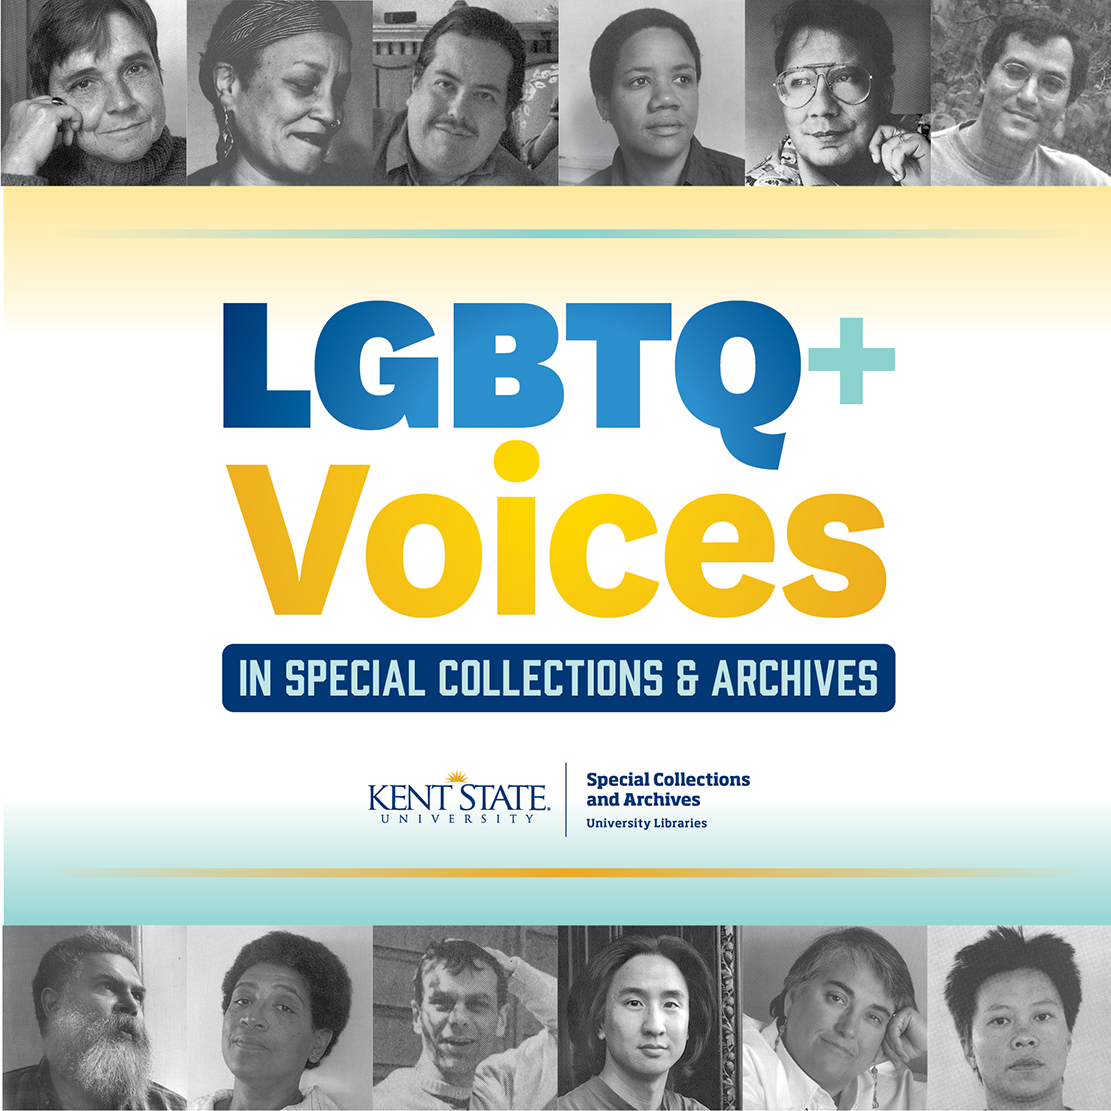 This is an image advertising for the exhibit, "LGBTQ+ Voices in Special Collections & Archives." The top and the bottom of this image feature rows of headshots of LGBTQ+ Authors. The title of the exhibit is in the center.